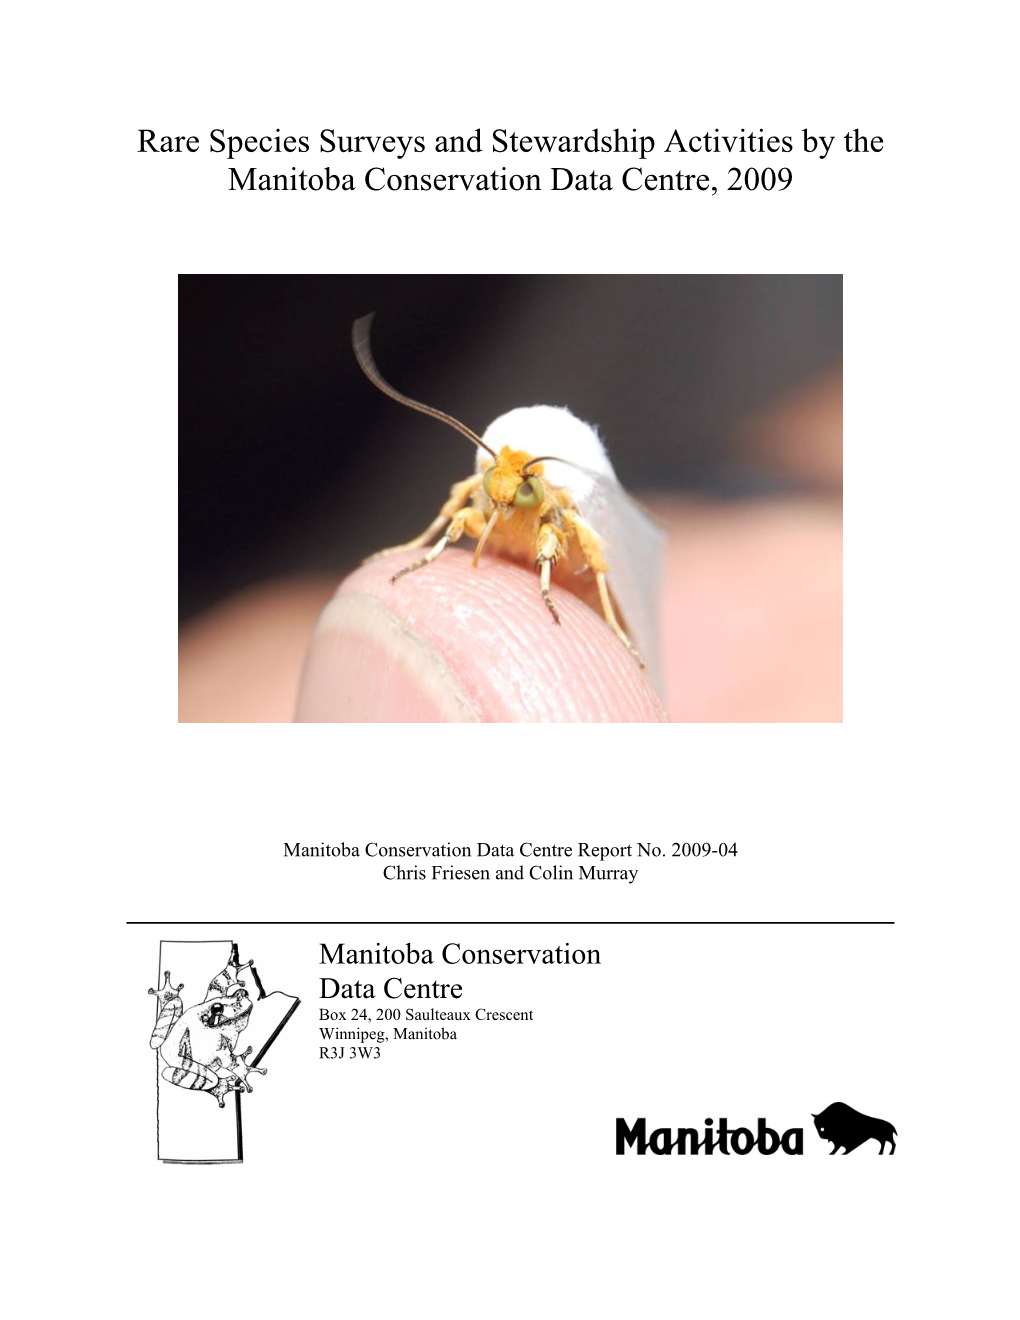 Rare Species Surveys and Stewardship Activities by the Manitoba Conservation Data Centre, 2009